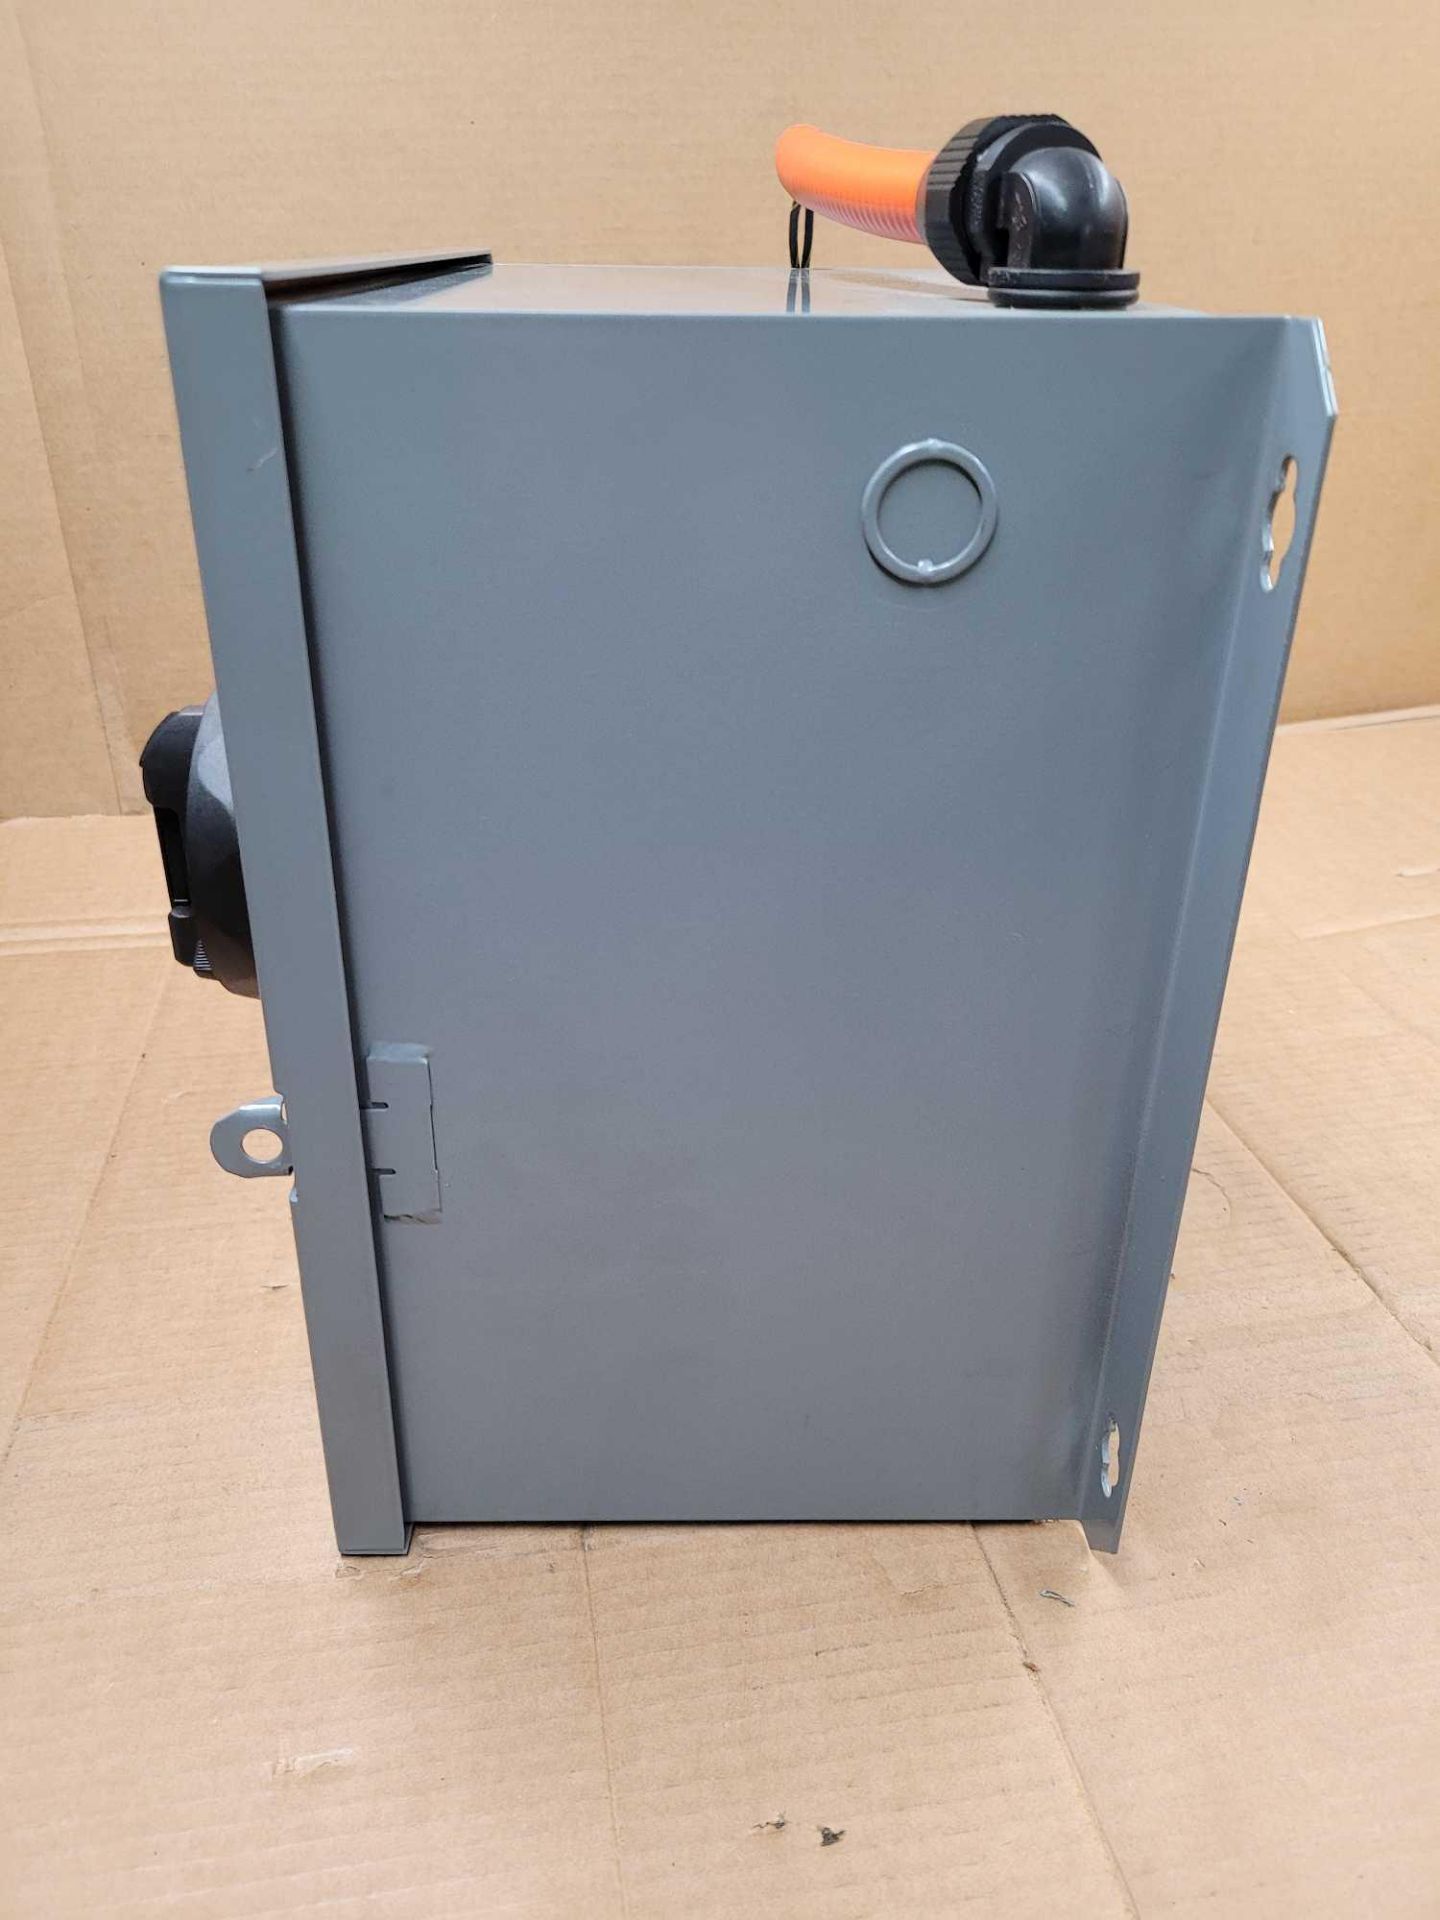 SQUARE D SK3000G3 / Series A Class 9070 Transformer Disconnect  /  Lot Weight: 65.6 lbs - Image 4 of 9